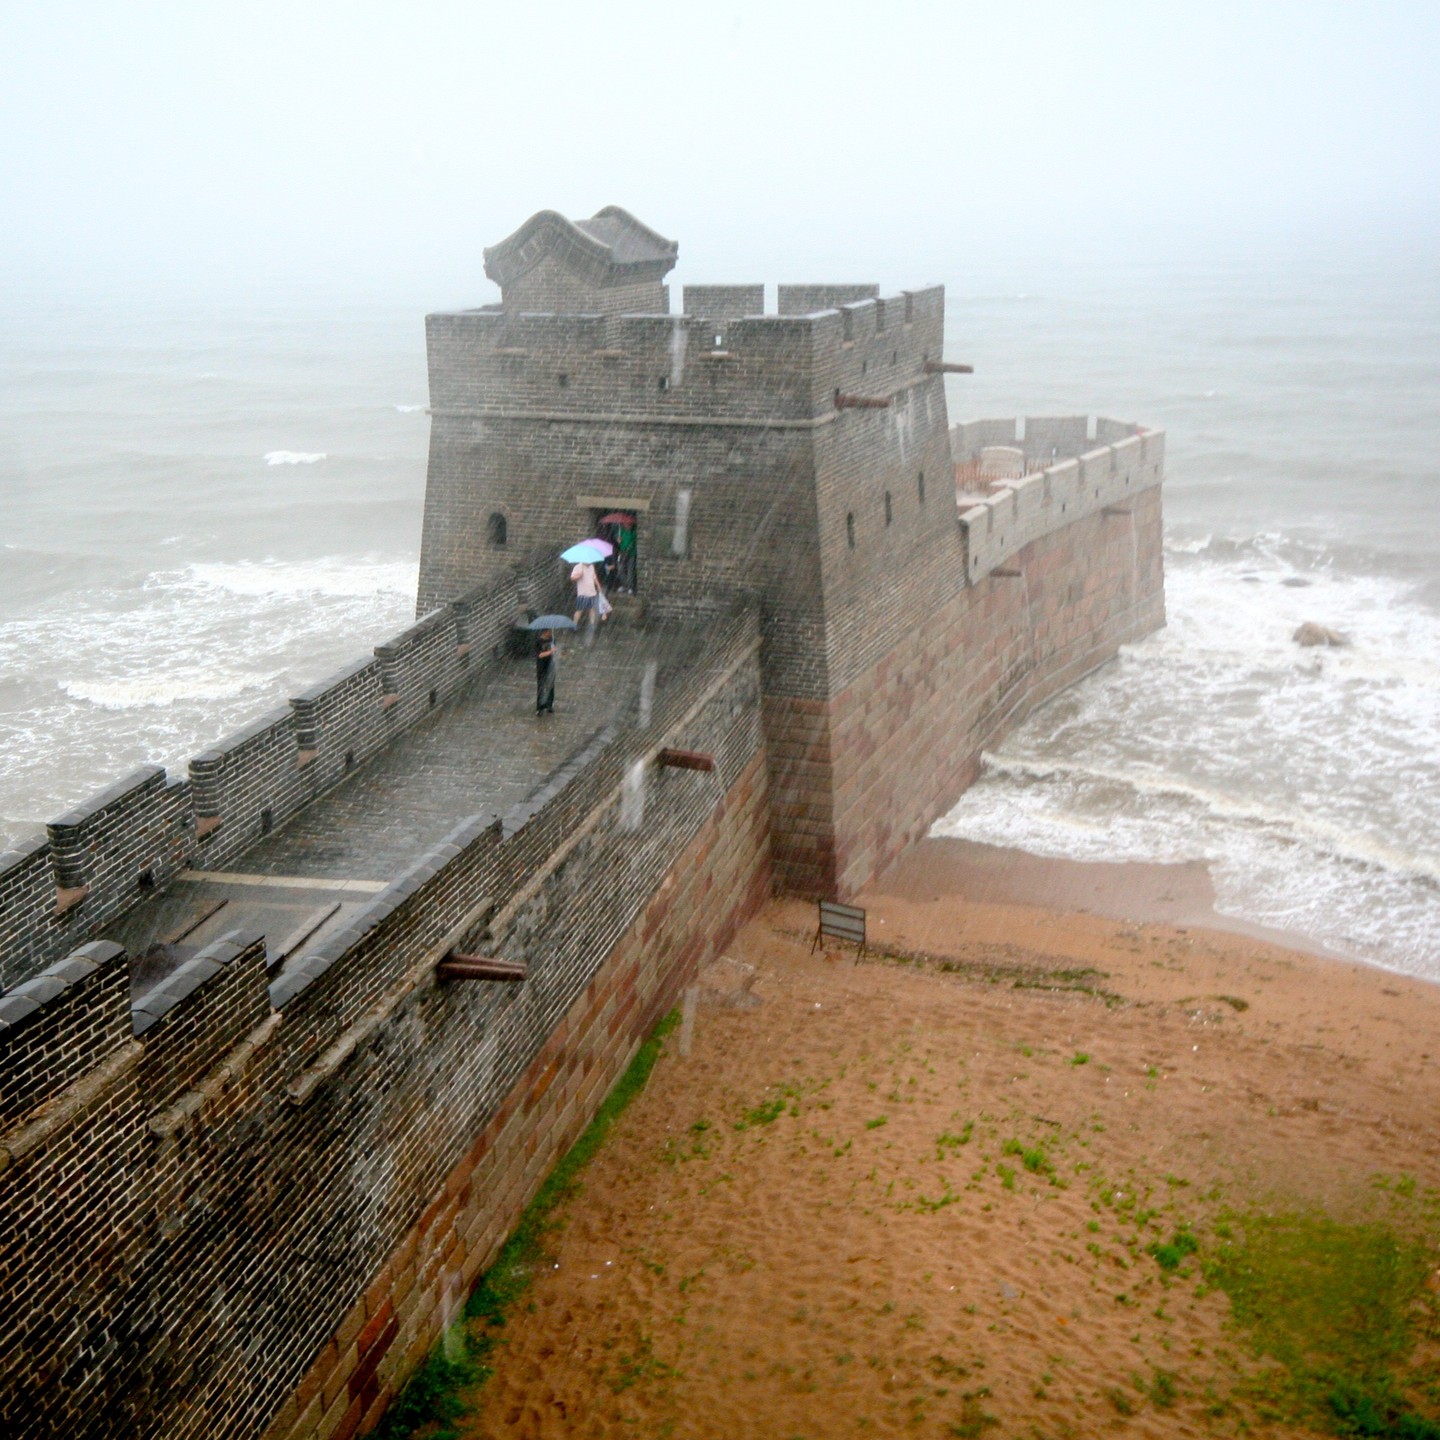 Laolongtou (Old Dragon's Head) - Where the Great Wall of China ends in the Bohai Sea